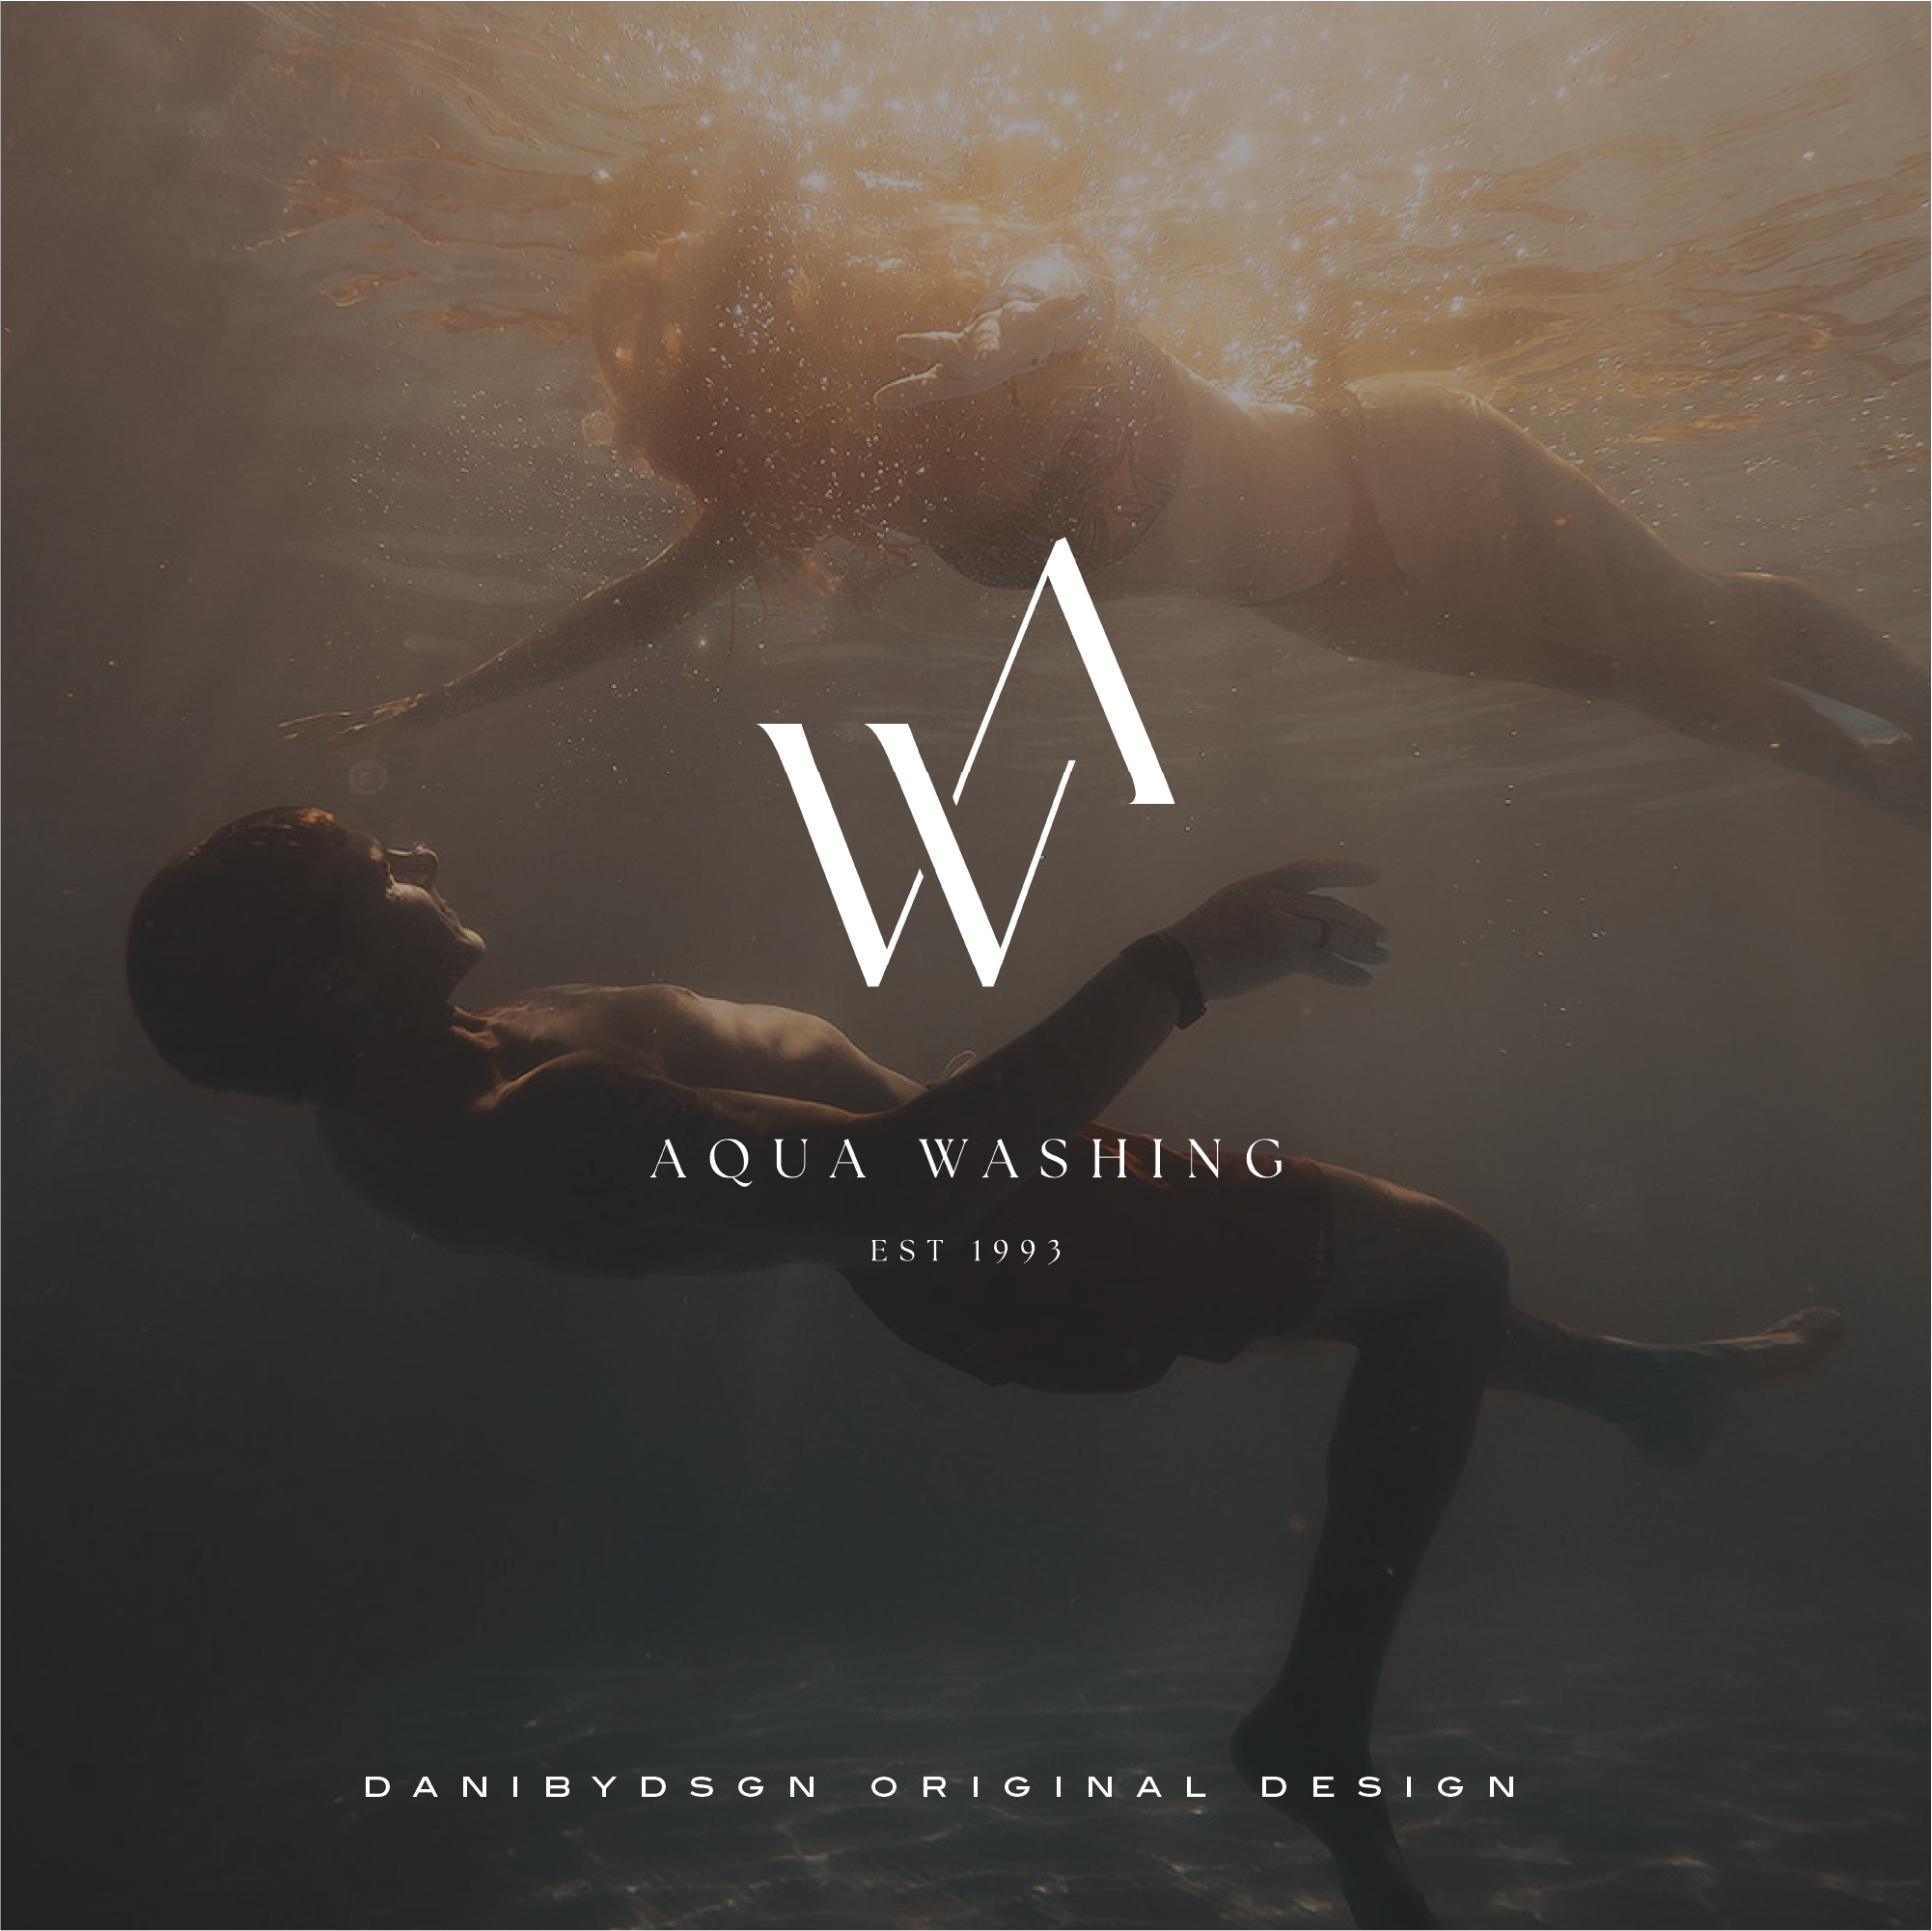 This  business branding initial monogram is for Aqua Washing and it is of the intials AW.  The initials are overlapped to create a unique and striking, elegant monogram symbol.  The pic is of a lady and gentleman underwater swimming and the business branding logo is the central point of the photo.  Elegant, stylish and modern monogram design. Check out our business initial monogram and branding kits